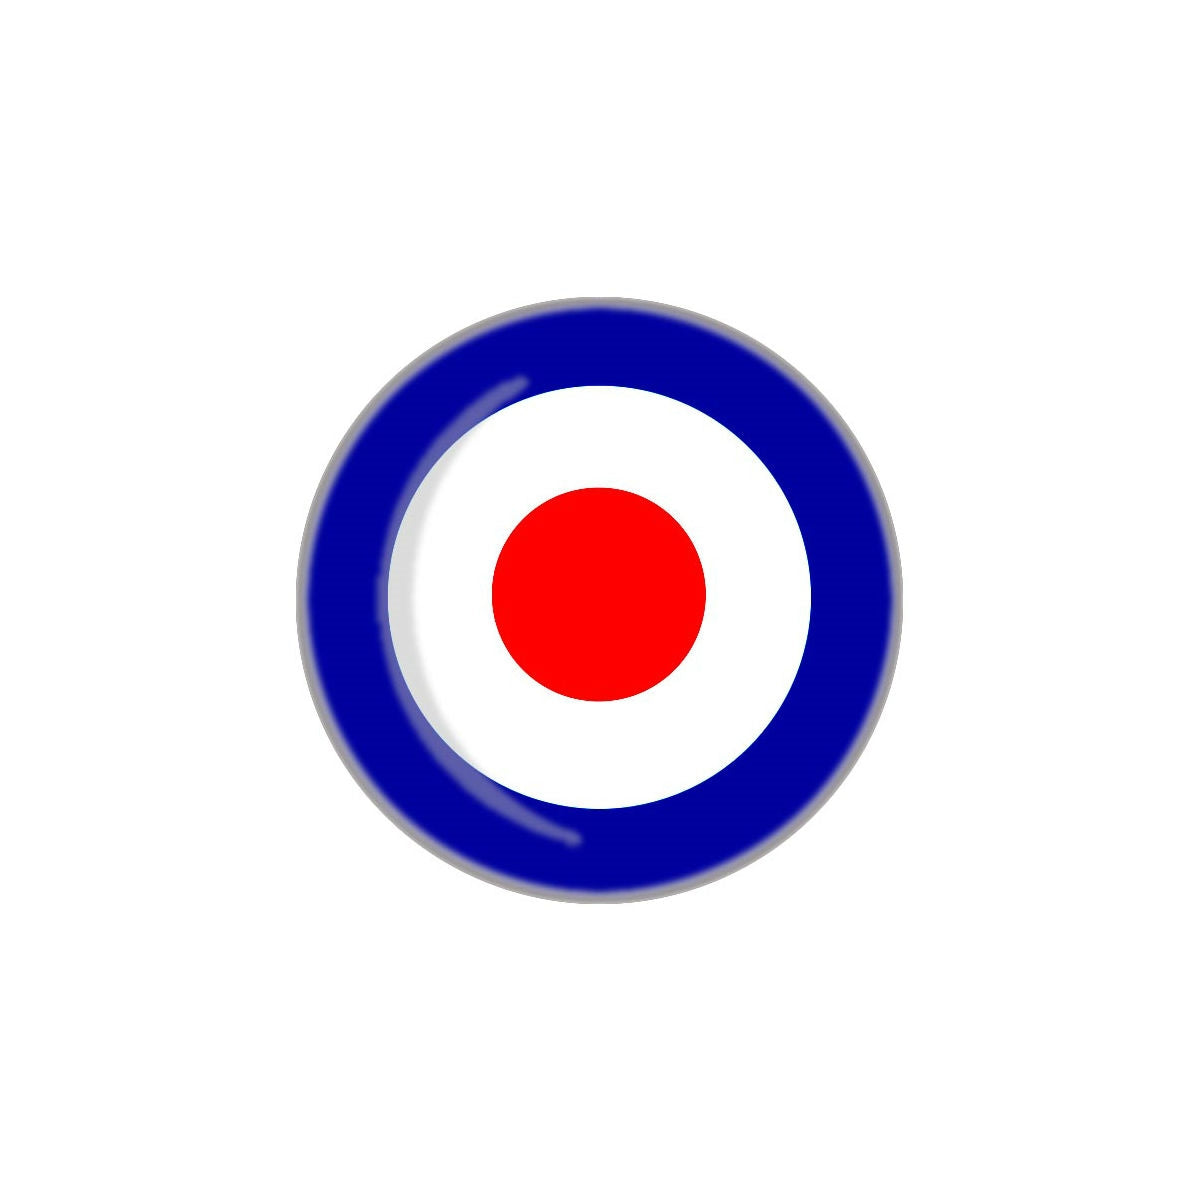 1" size round metal button of the concentric circle red, white & blue RAF roundel also known as the "Mod Target"